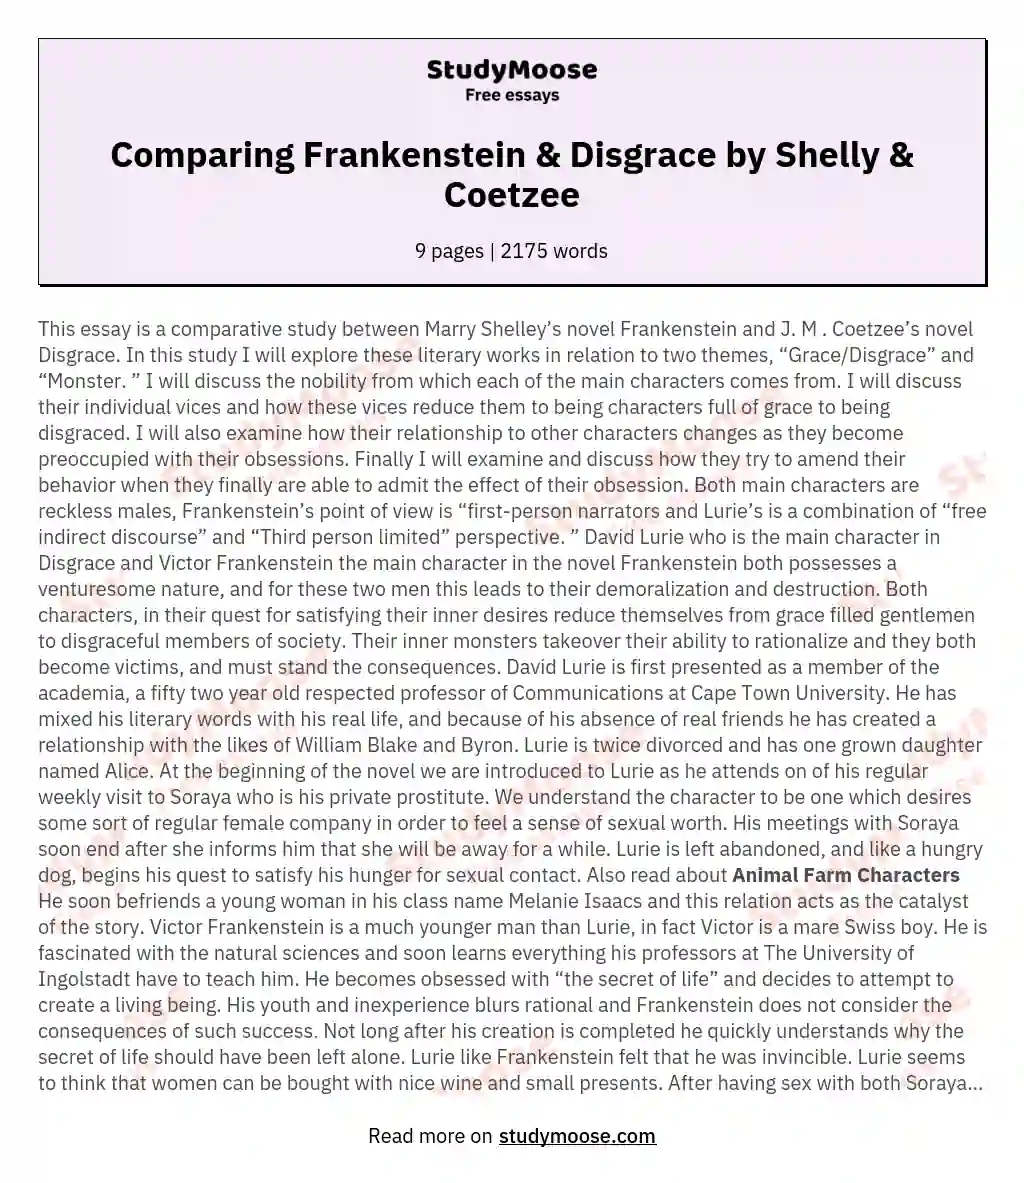 Comparing Frankenstein & Disgrace by Shelly & Coetzee essay